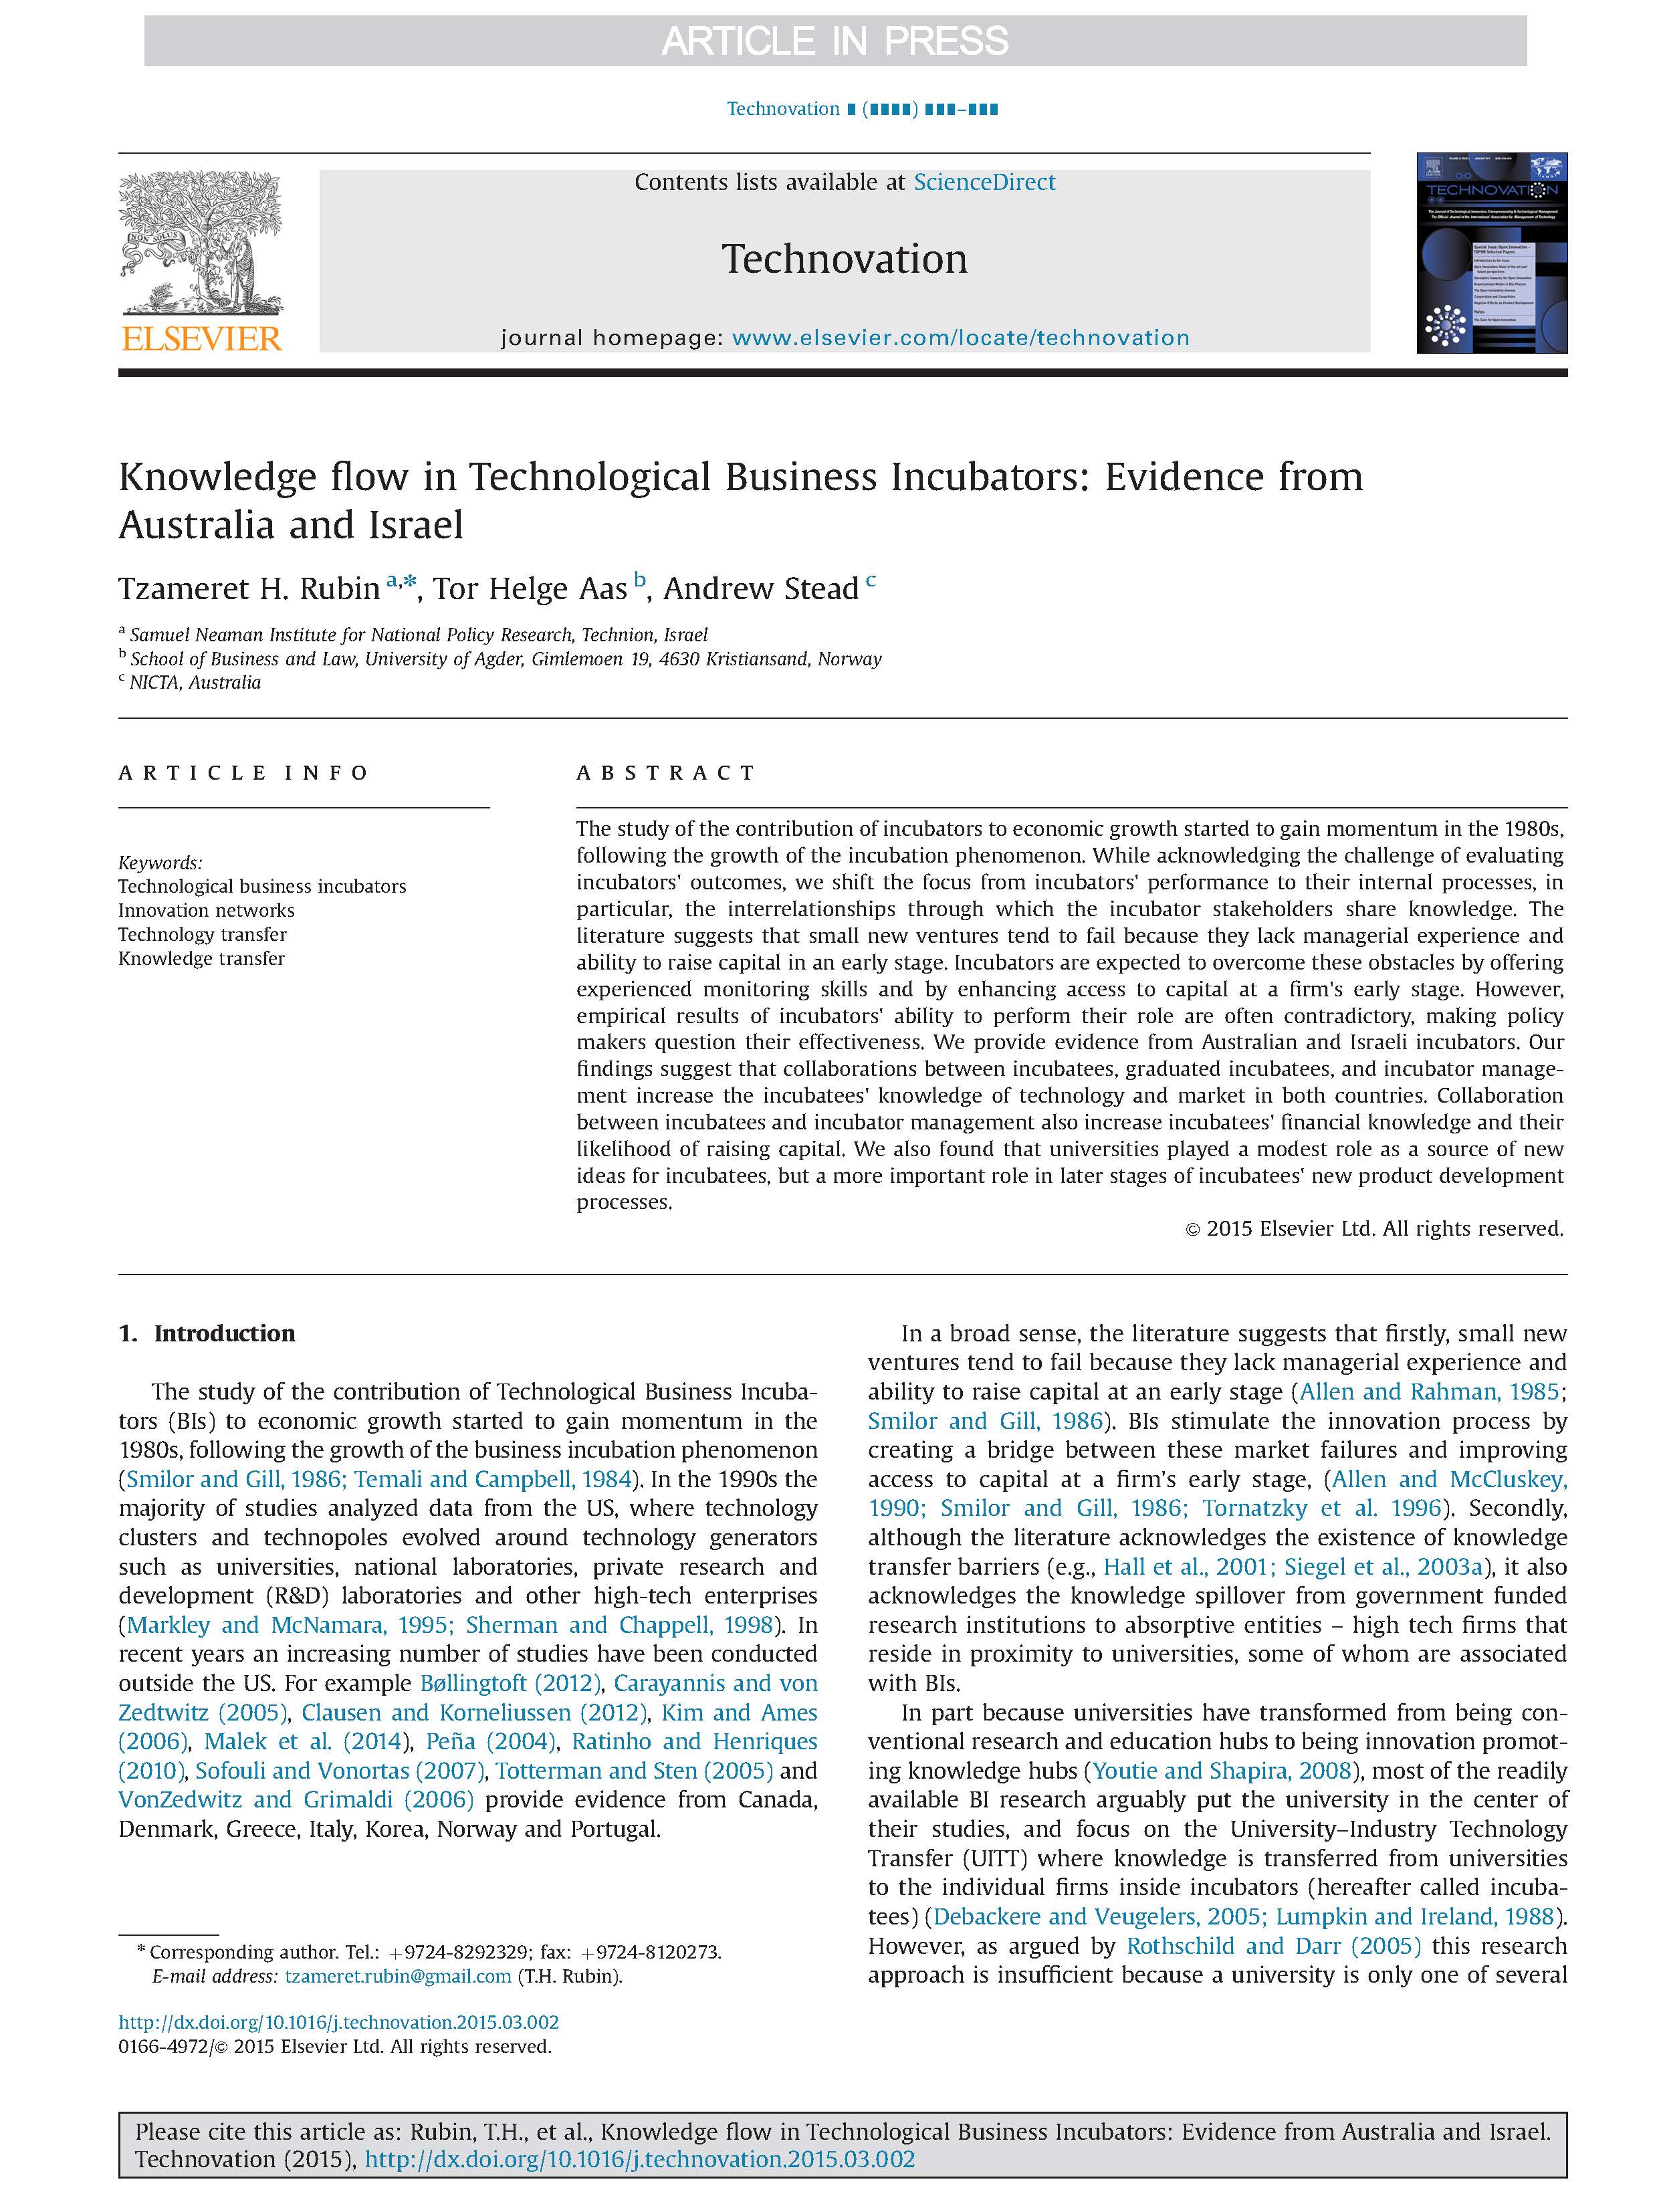 Knowledge flow in Technological Business Incubators: Evidence from Australia and Israel